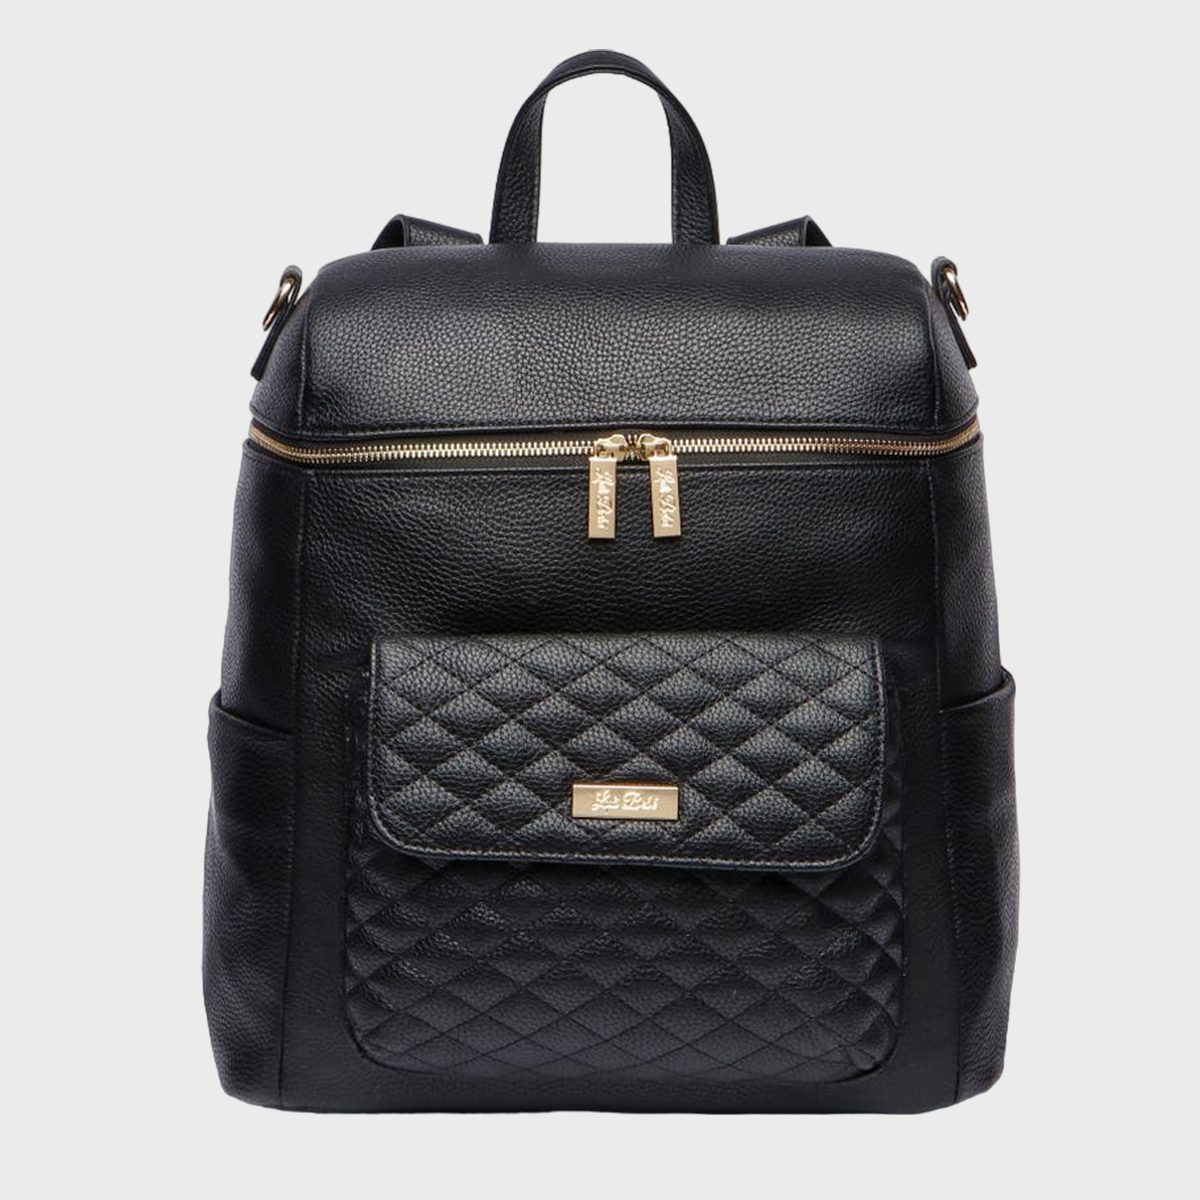 <p>Gone are the days when moms had to lug around giant duffle-bag-style diaper bags. It's a <a href="https://www.rd.com/list/mom-invented-products/" rel="noopener noreferrer">mom-invented product</a> (the company was founded by moms) that is pure genius, thanks to the modern fashion-forward design that looks like a chic backpack while actually offering enough storage for a breast pump, diapers, bottles and more.</p> <p>The <a href="https://www.nordstrom.com/s/luli-beb-monaco-faux-leather-diaper-backpack/5503990" rel="noopener noreferrer">diaper bag</a> comes with a changing pad, stroller straps, and a removable clip-on strap for over-the-shoulder or cross-body wear. As a mom of four, I love this diaper bag so much that I have it in two colors, and then went ahead and bought the <a href="https://lulibebeus.com/collections/monaco-petit" rel="noopener noreferrer">petit size</a> for quick outings.</p> <p class="listicle-page__cta-button-shop"><a class="shop-btn" href="https://www.nordstrom.com/s/luli-beb-monaco-faux-leather-diaper-backpack/5503990">Shop Now</a></p>